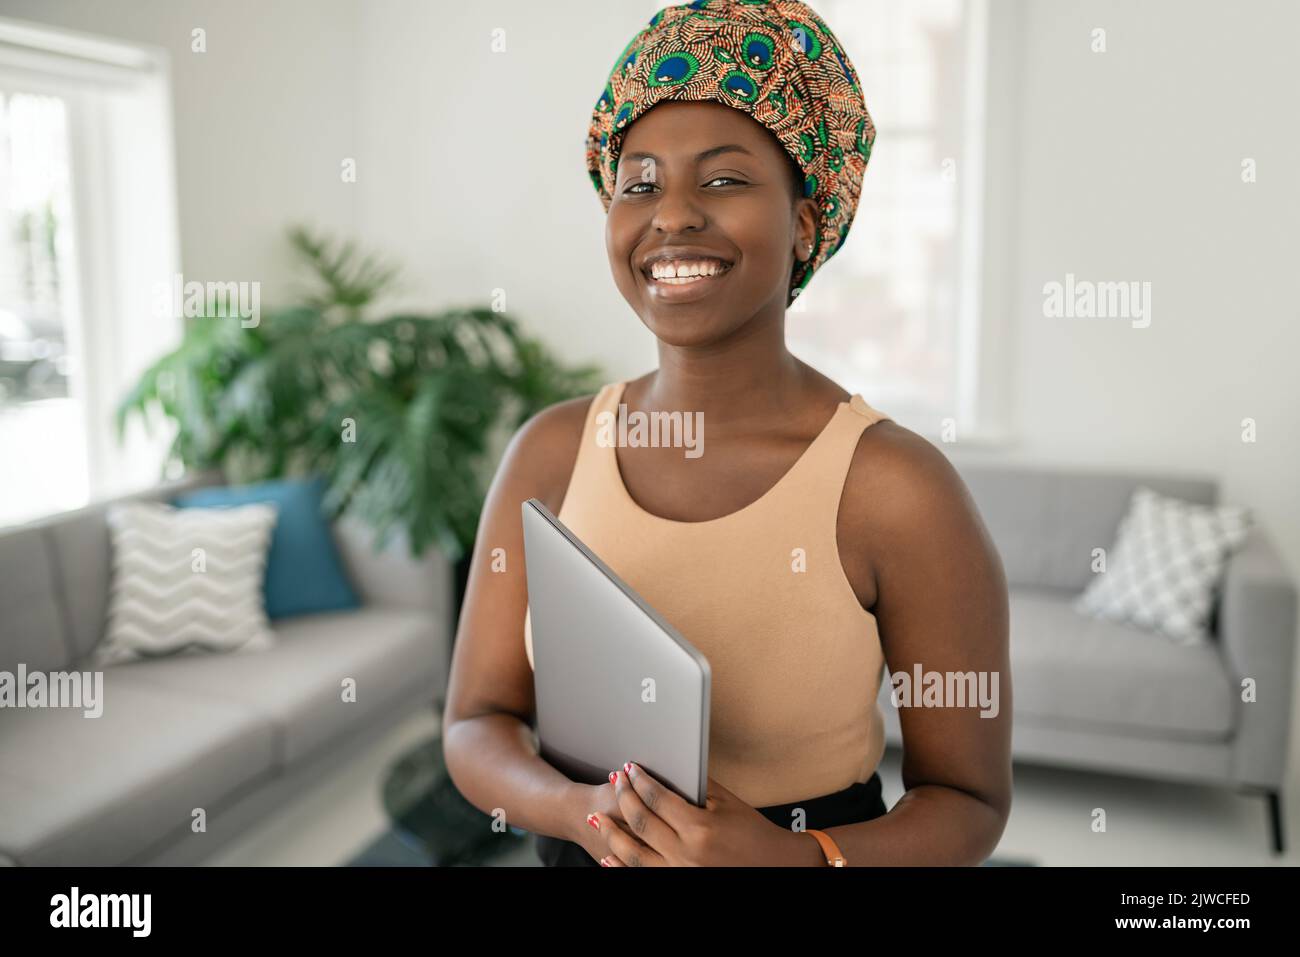 Portrait of beautiful smiling African woman standing in modern home with laptop in hand, wearing a traditional headscarf Stock Photo